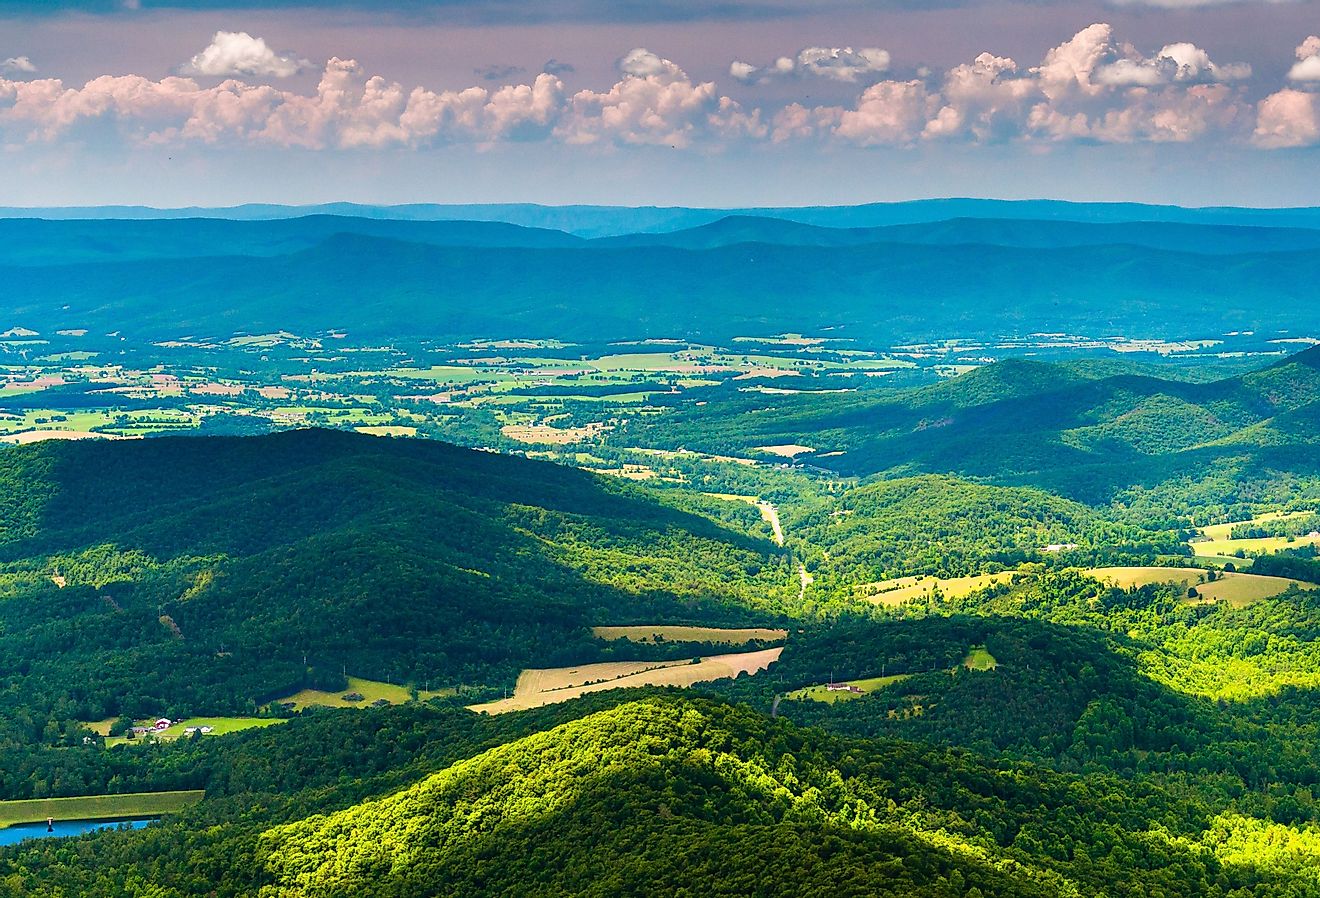 Clouds cast shadows over the Appalachian Mountains and Shenandoah Valley, seen from Shenandoah National Park, Virginia. Image credit Jon Bilous via Shutterstock.